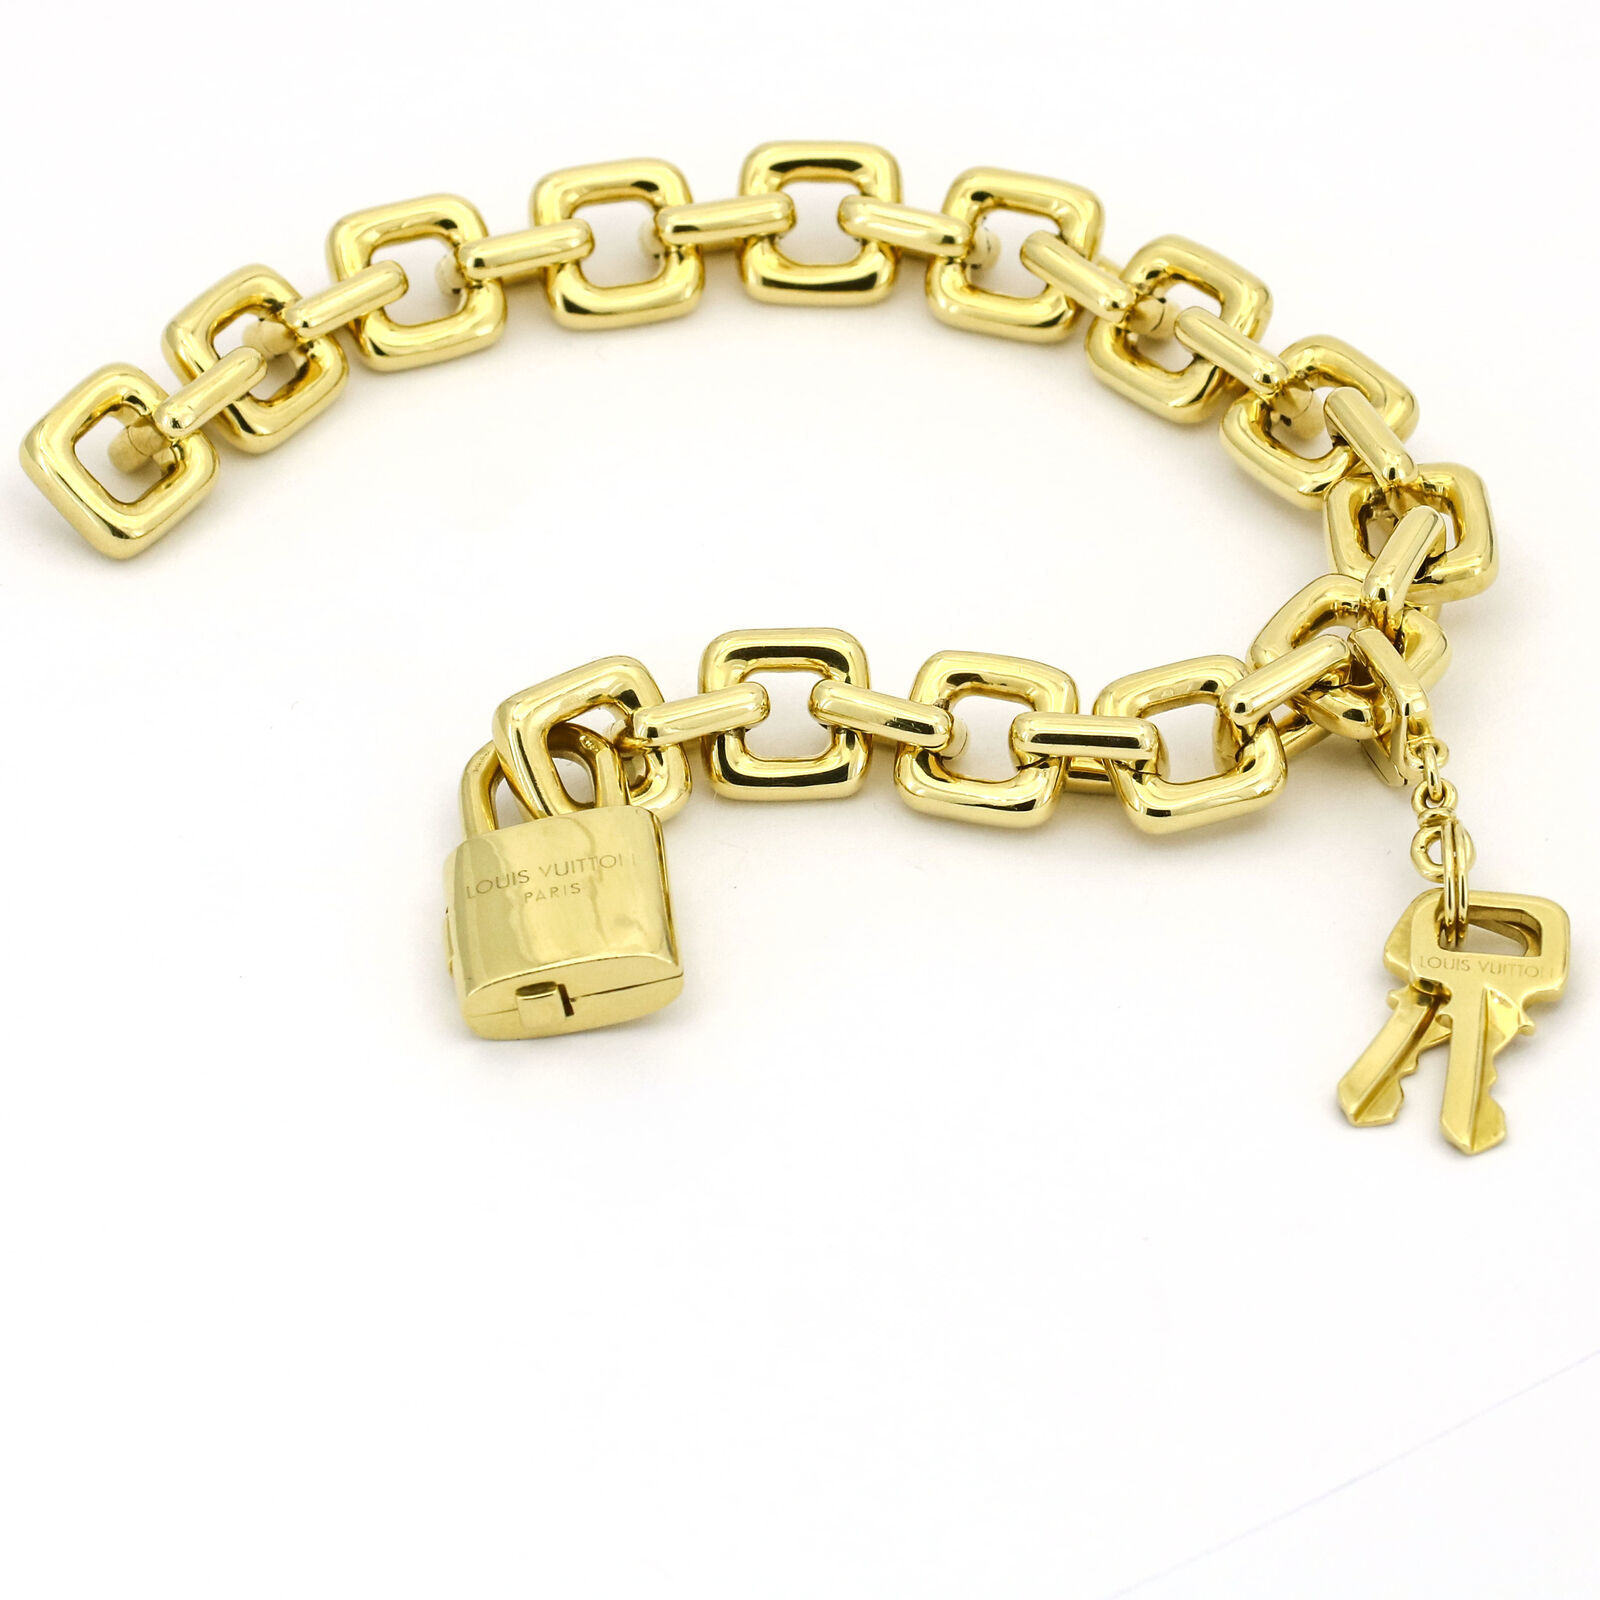 Louis Vuitton Padlock and Keys Charm Bracelet in 18k Yellow Gold with Box - Precious Metal ...